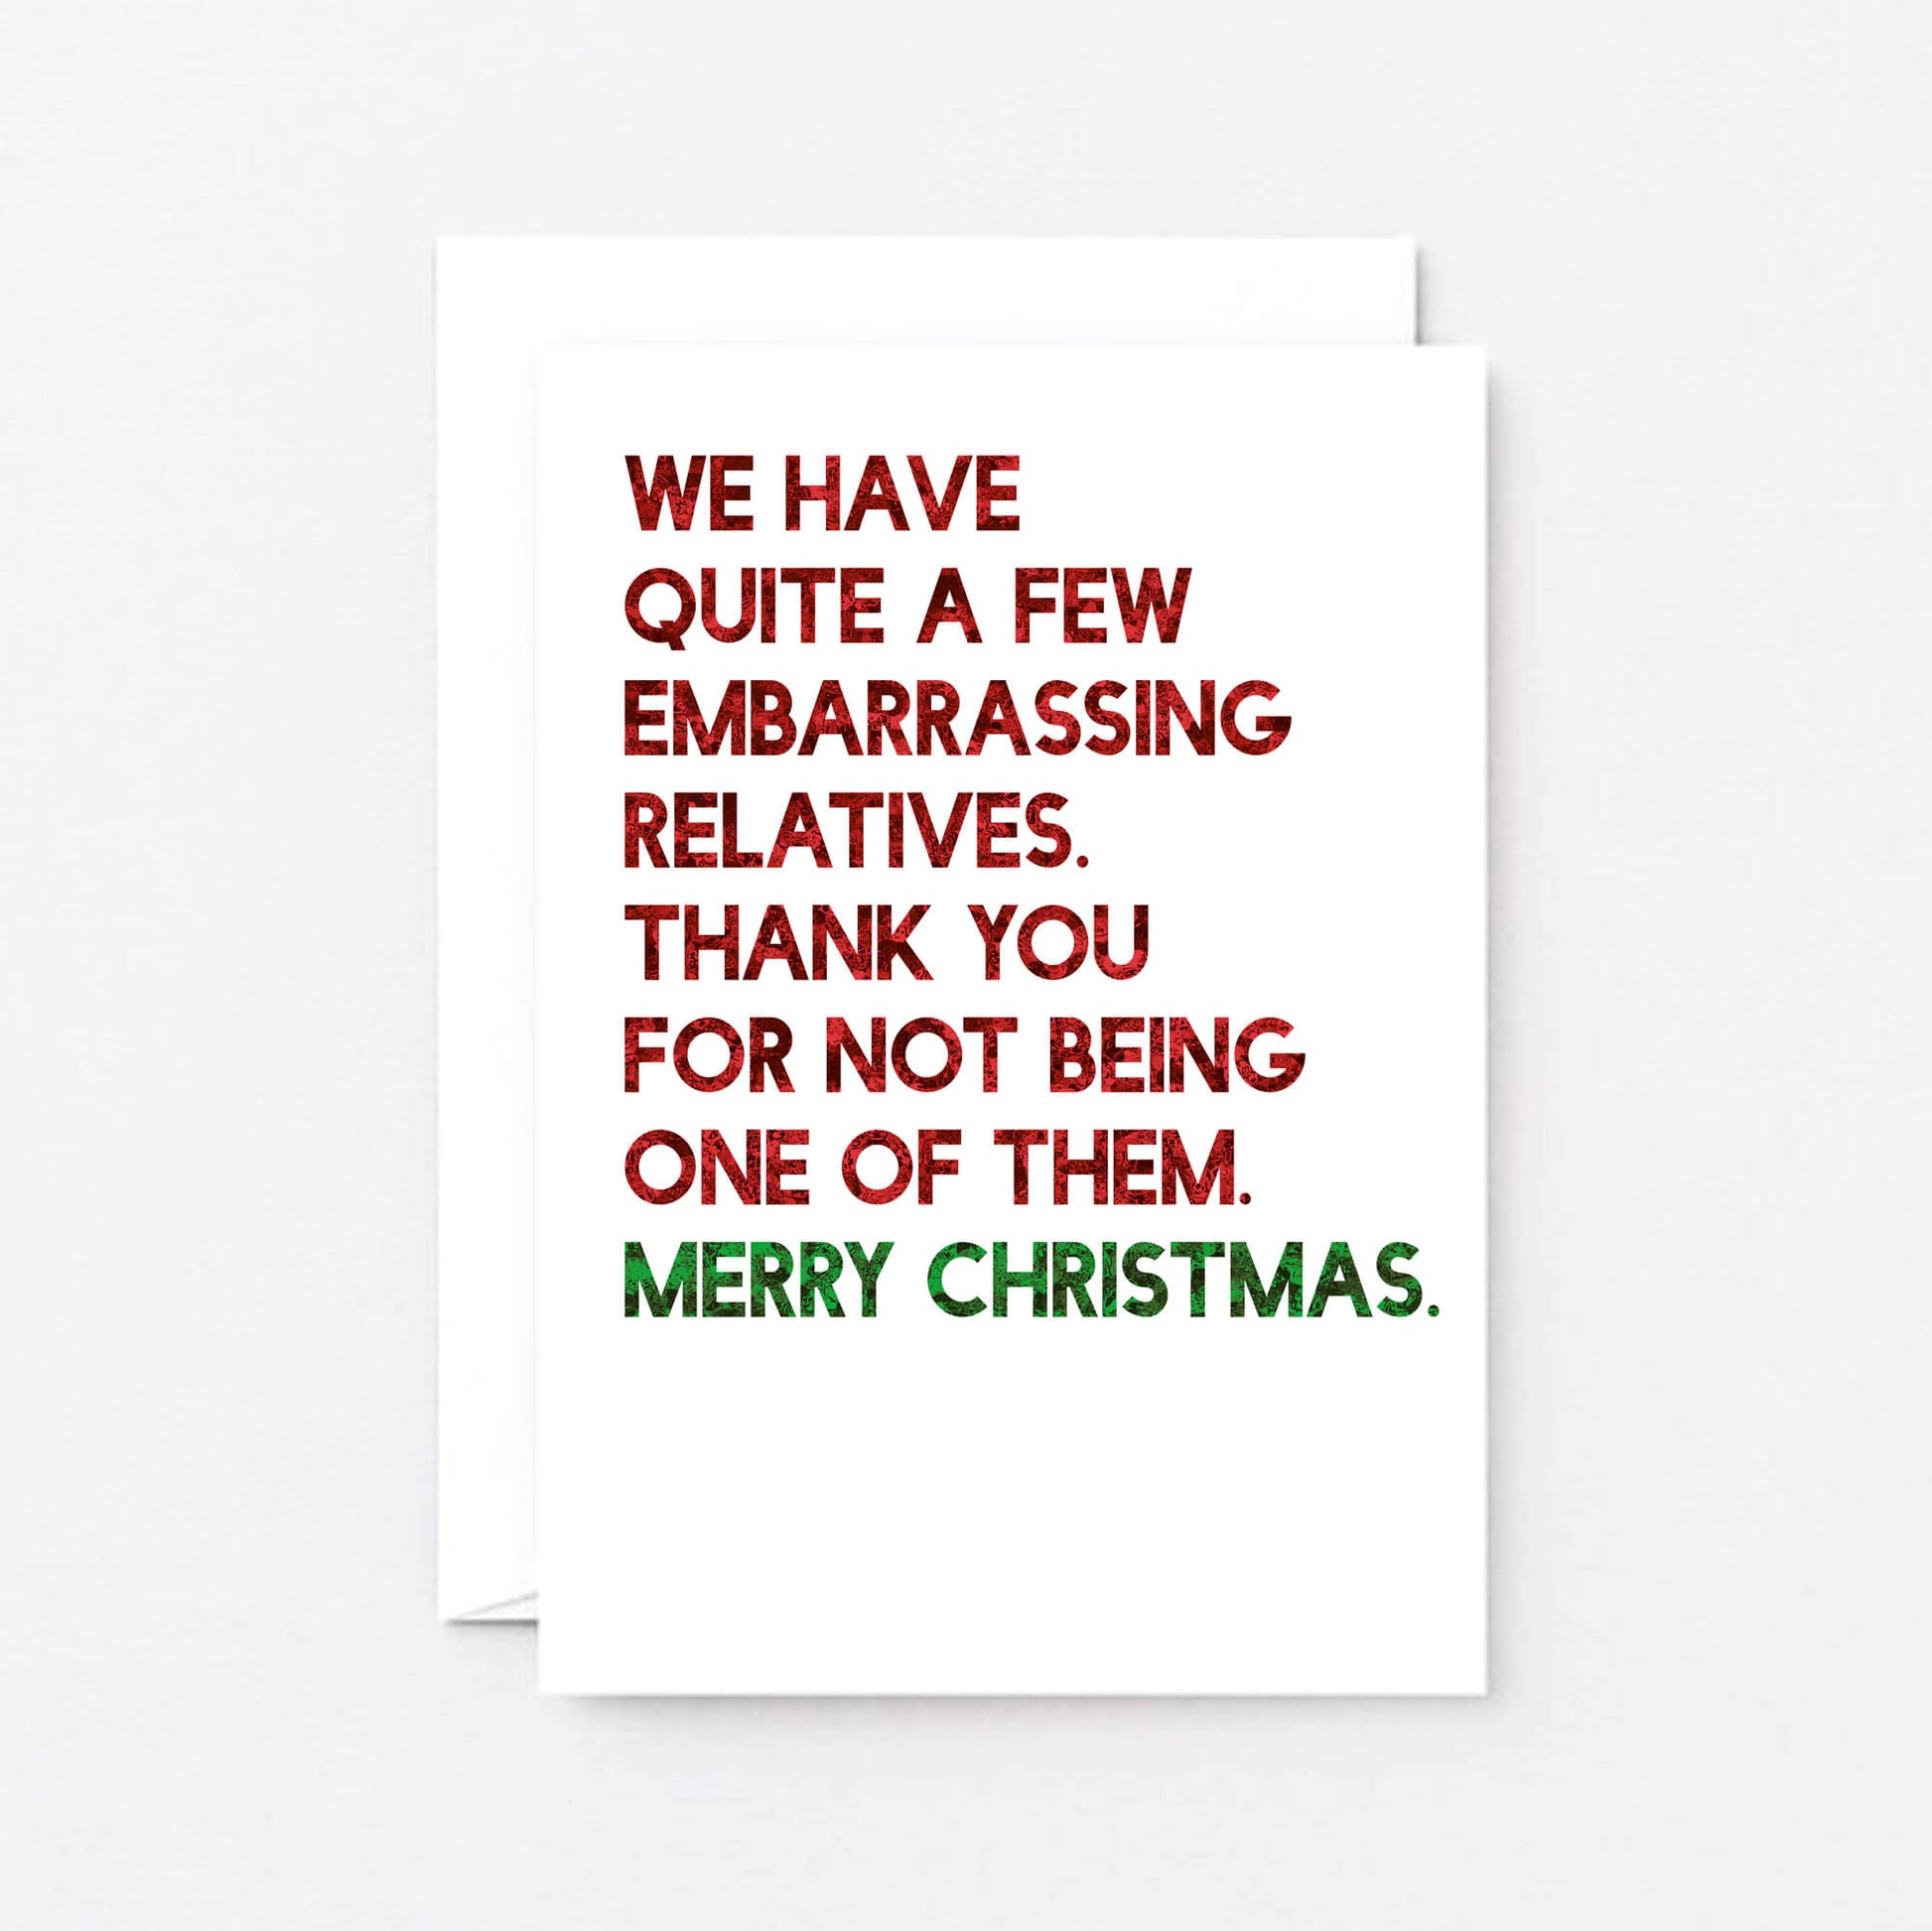 Christmas Card by SixElevenCreations. Reads We have quite a few embarrassing relatives. Thank you for not being one of them. Merry Christmas. Product Code SEC0057A6